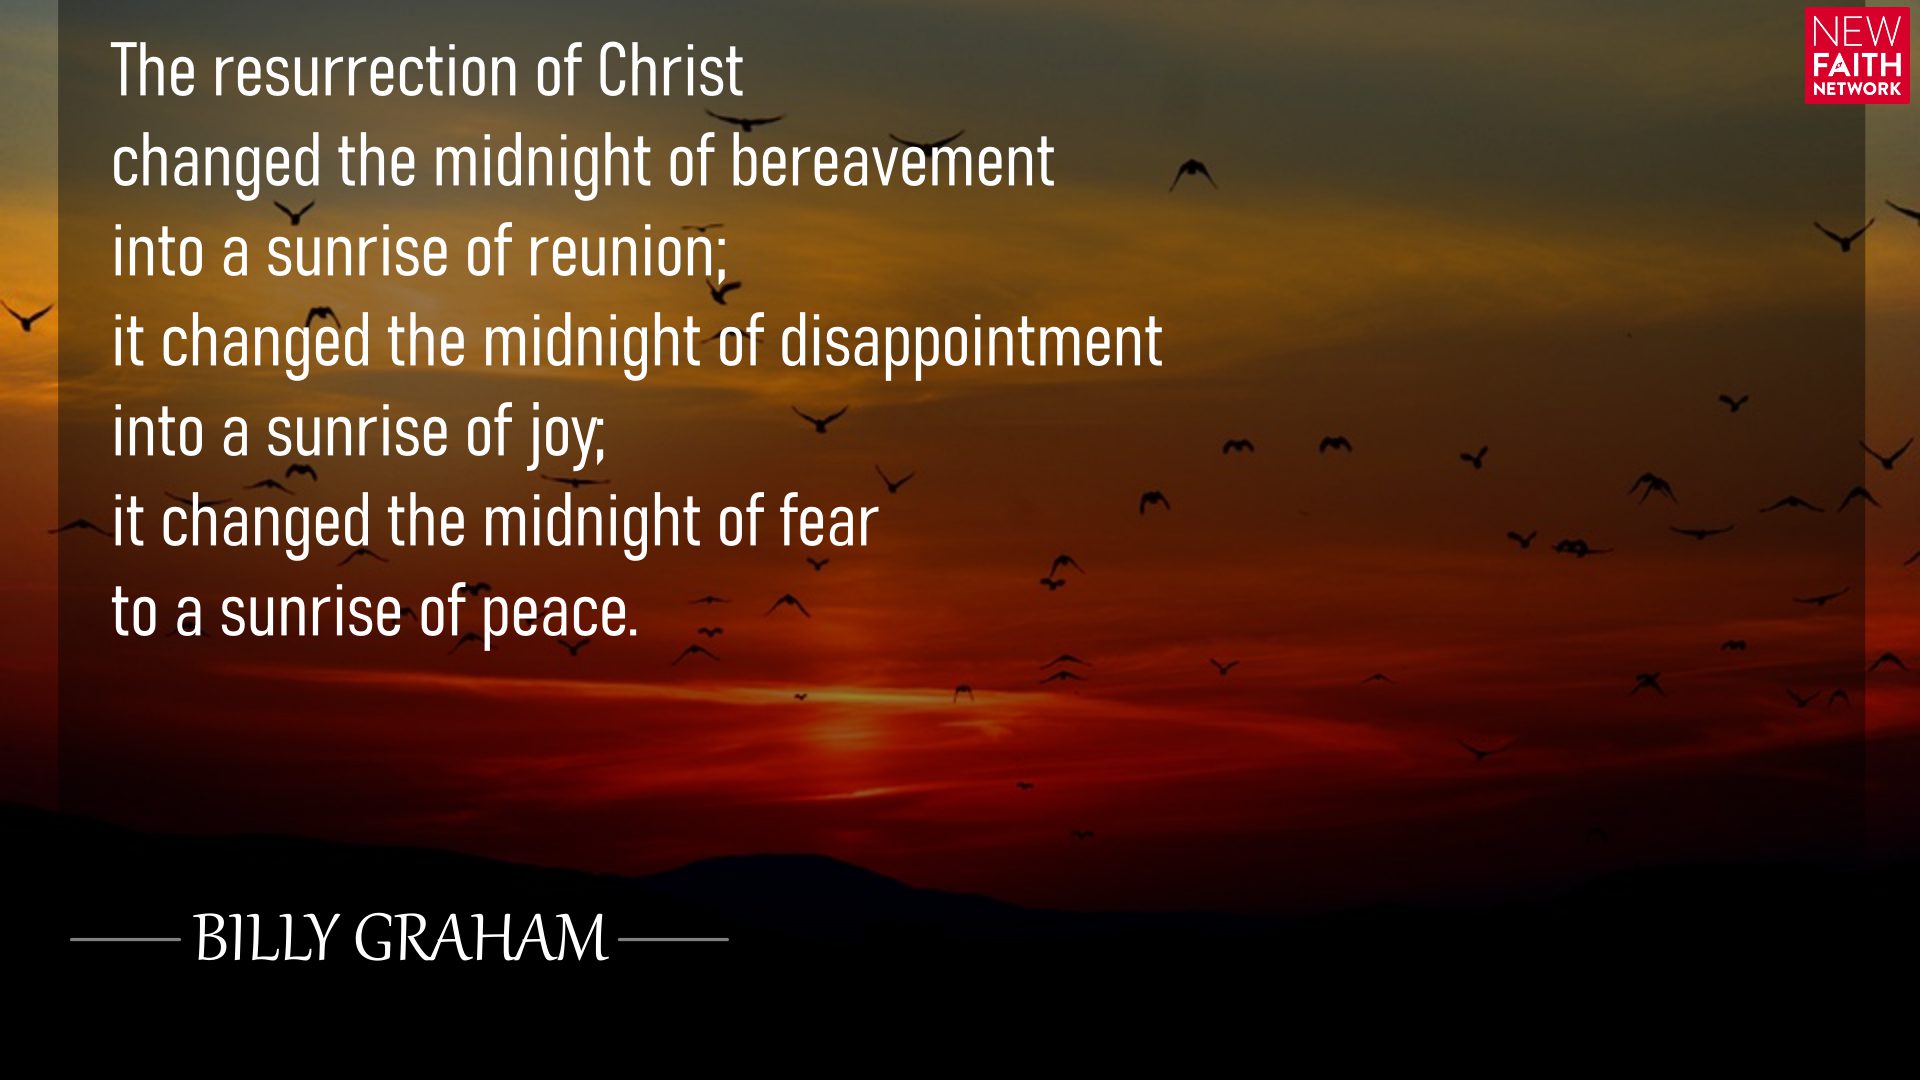 The resurrection of Christ changed the midnight of bereavement into a sunrise of reunion; it changed the midnight of disappointment into a sunrise of joy; it changed the midnight of fear to a sunrise of peace.